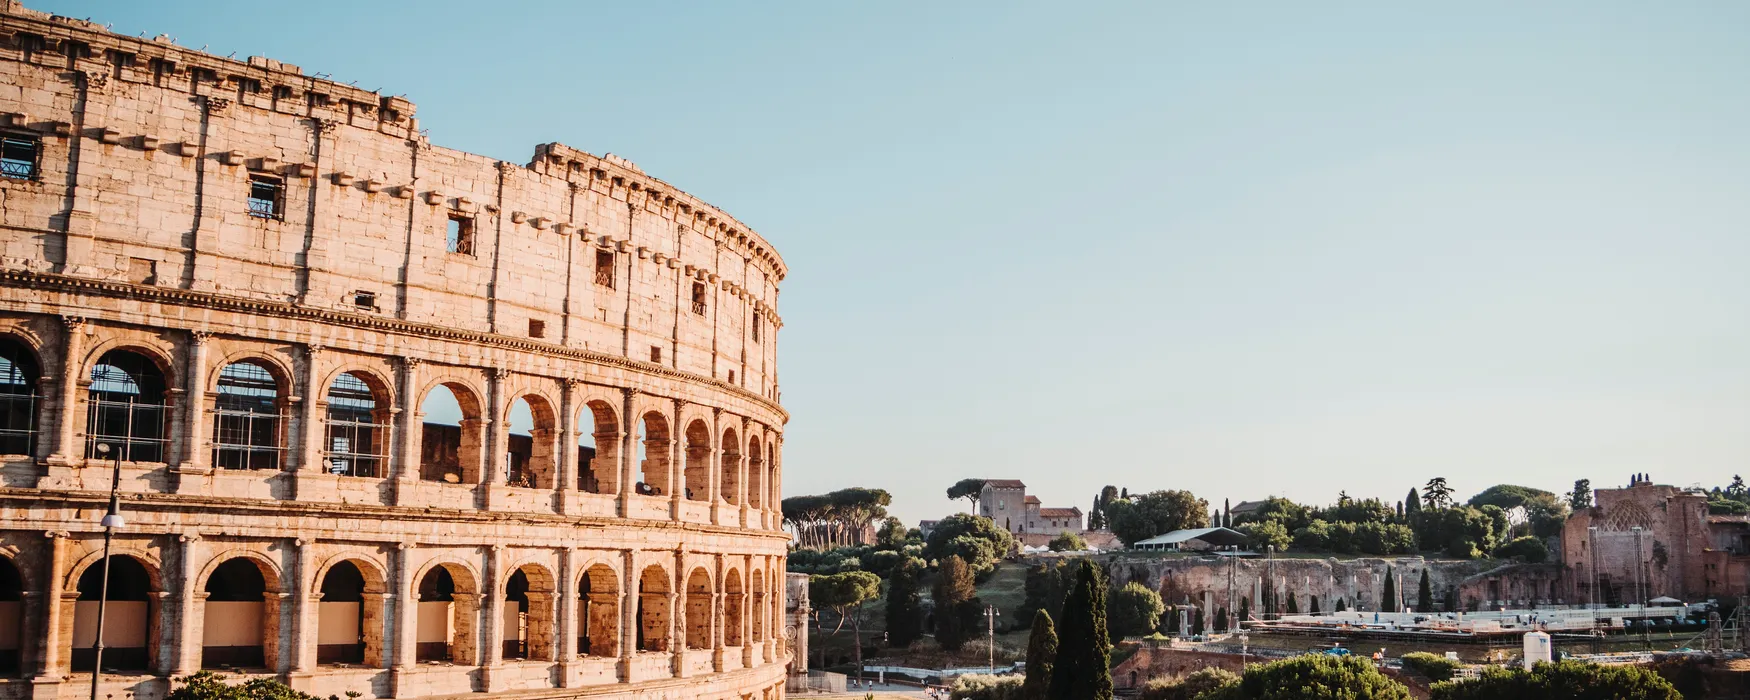 Discover amazing views and activities in Rome with Viewnary